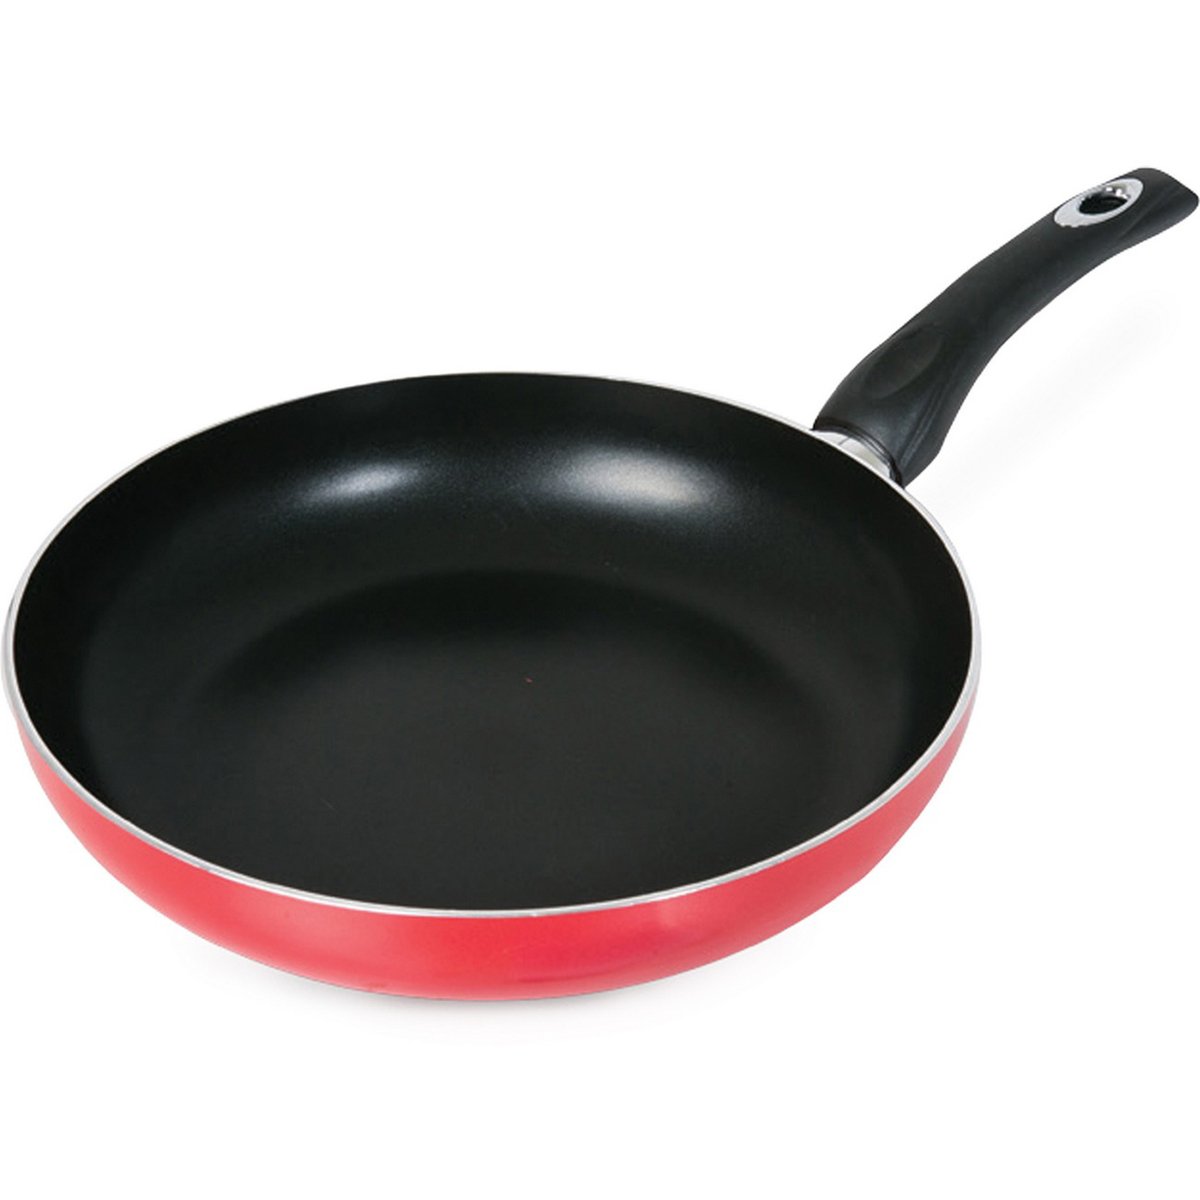 Chefline Fry Pan 30cm with Induction Base